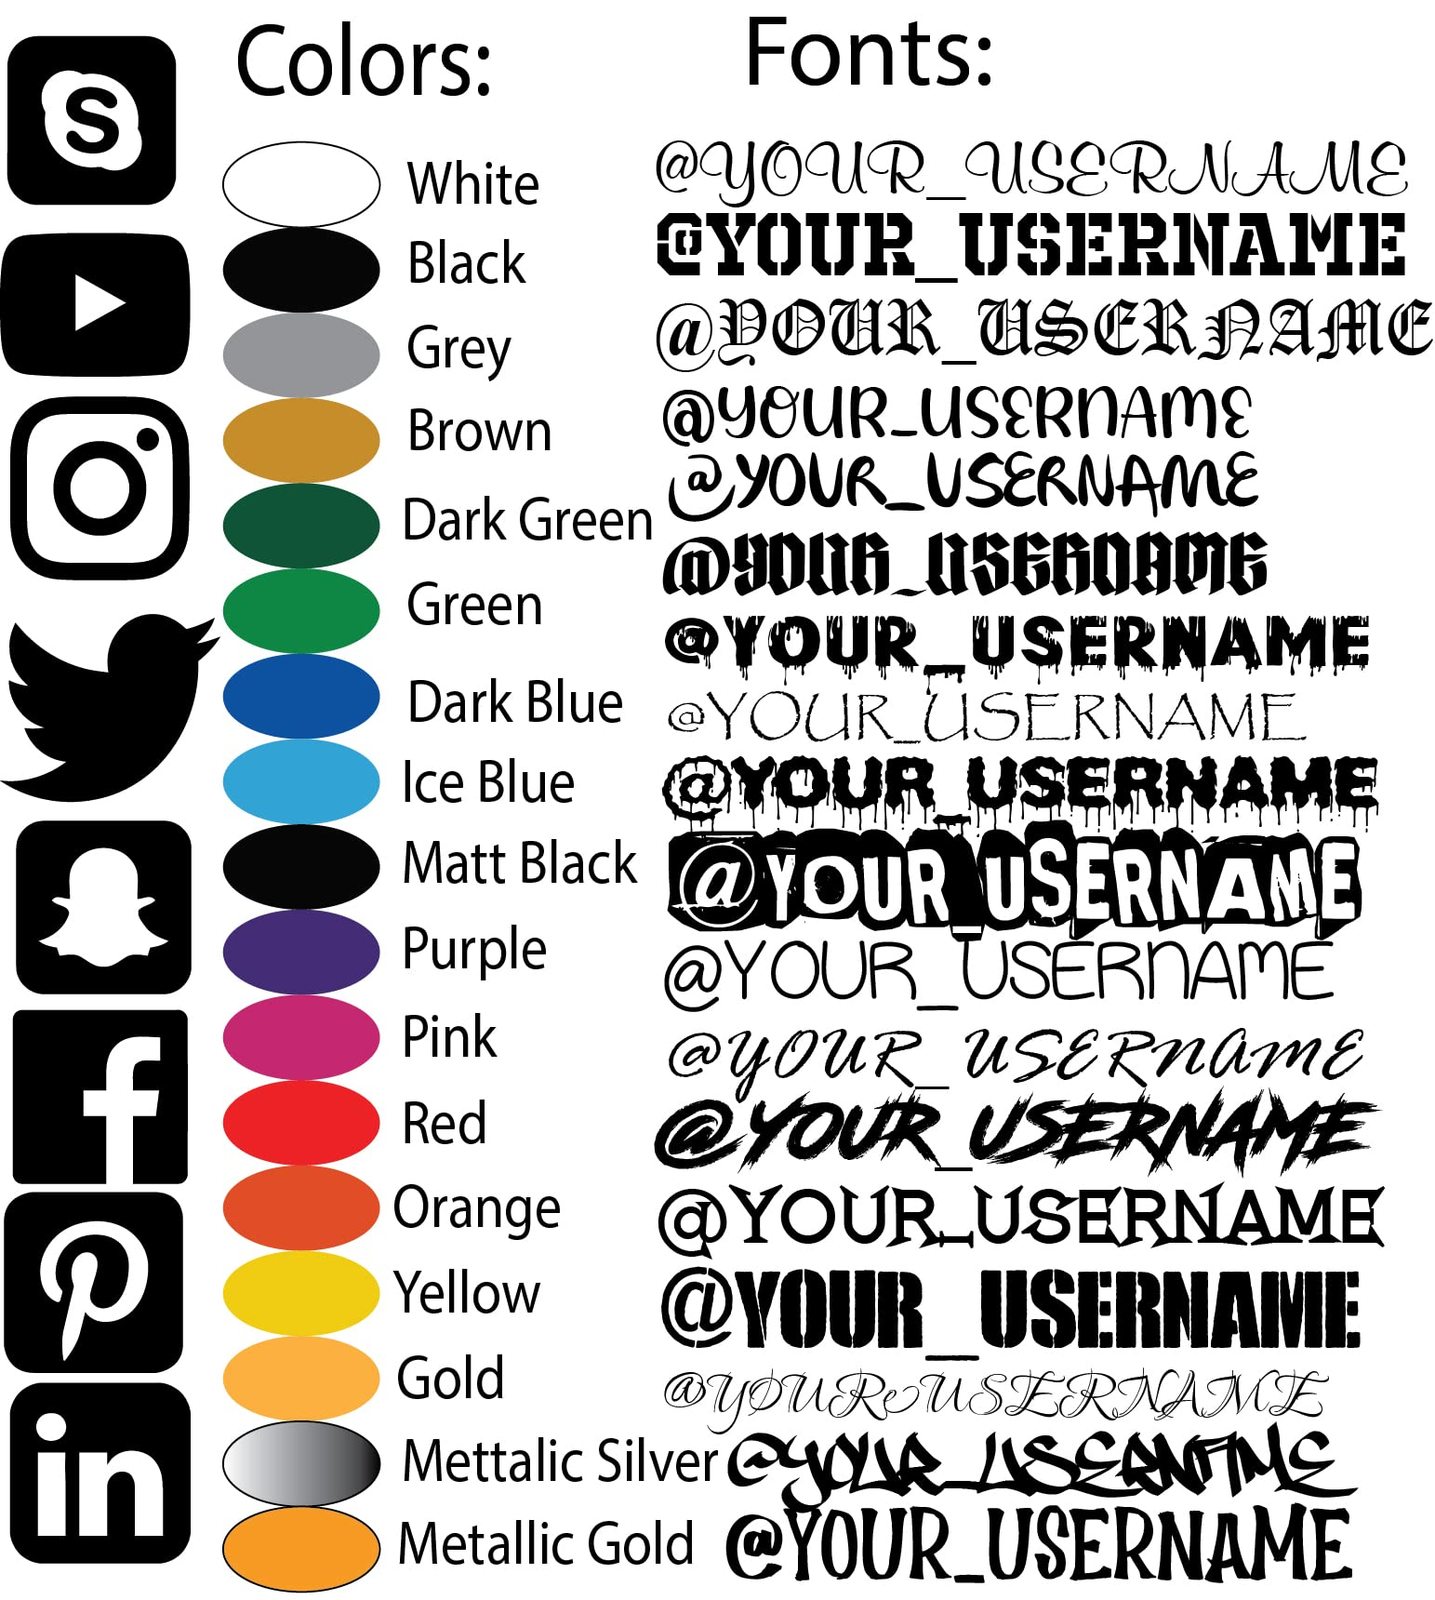 Custom Social Media Decal - Personalized Design Your Own - Stickers Customized N - $99.00